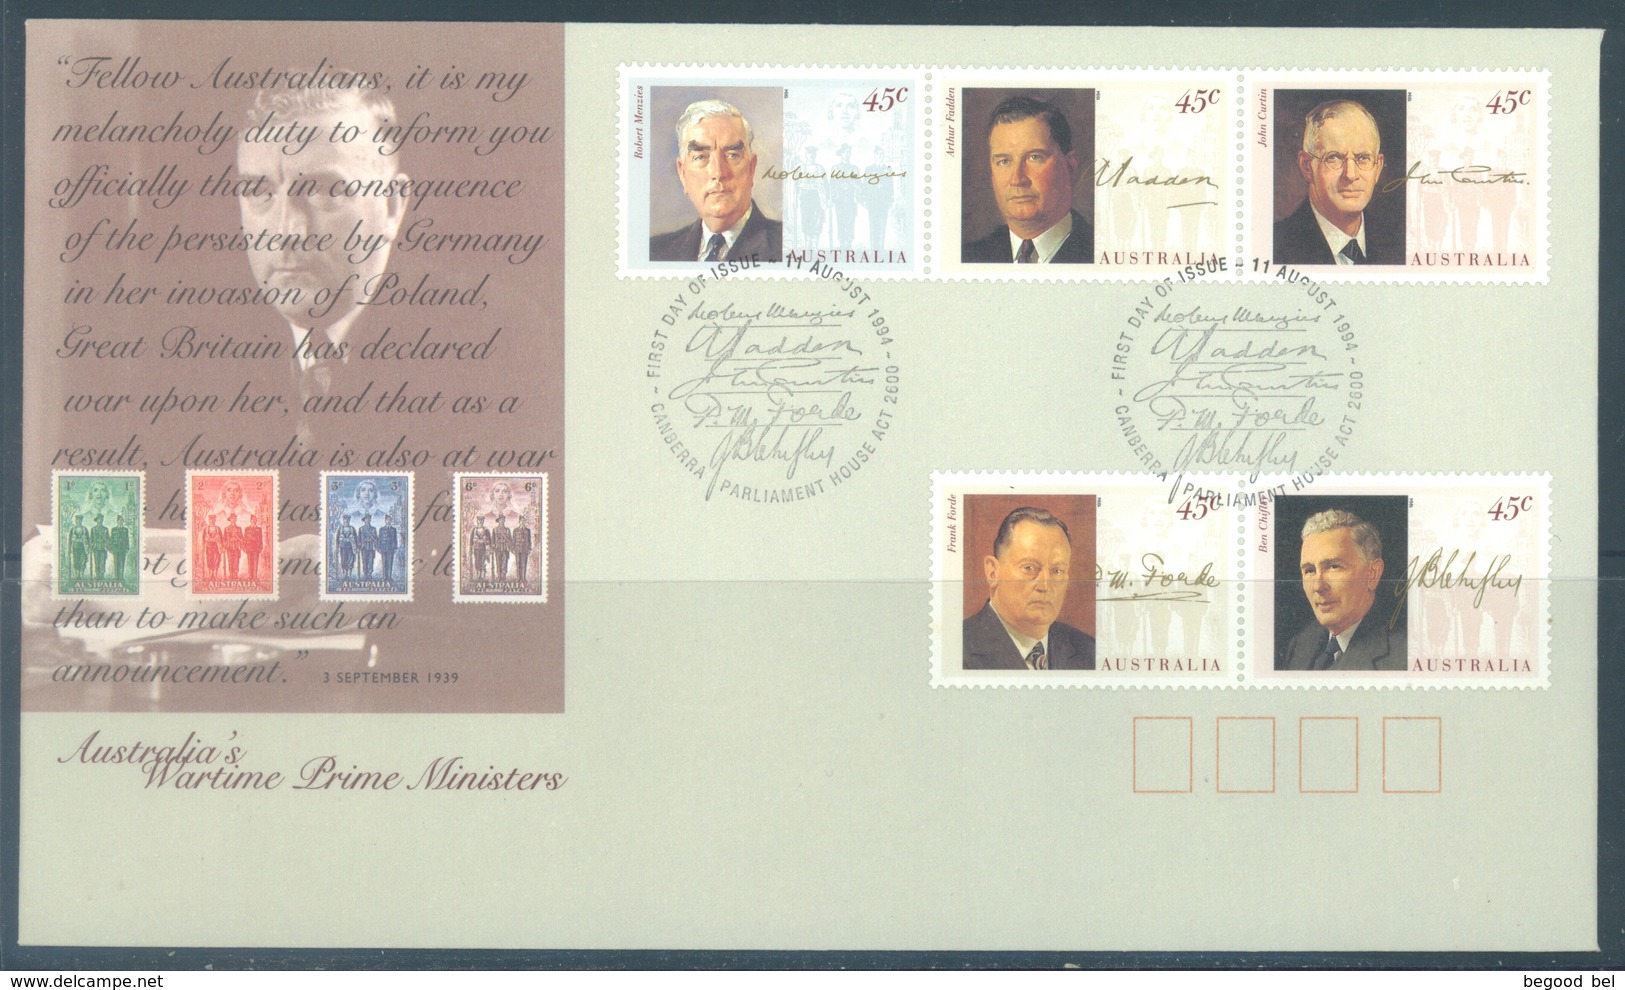 AUSTRALIA  - FDC - 11.8.1994 - WARTIME 1st MINISTERS - Yv 1379-1383  - Lot 18645 - Premiers Jours (FDC)